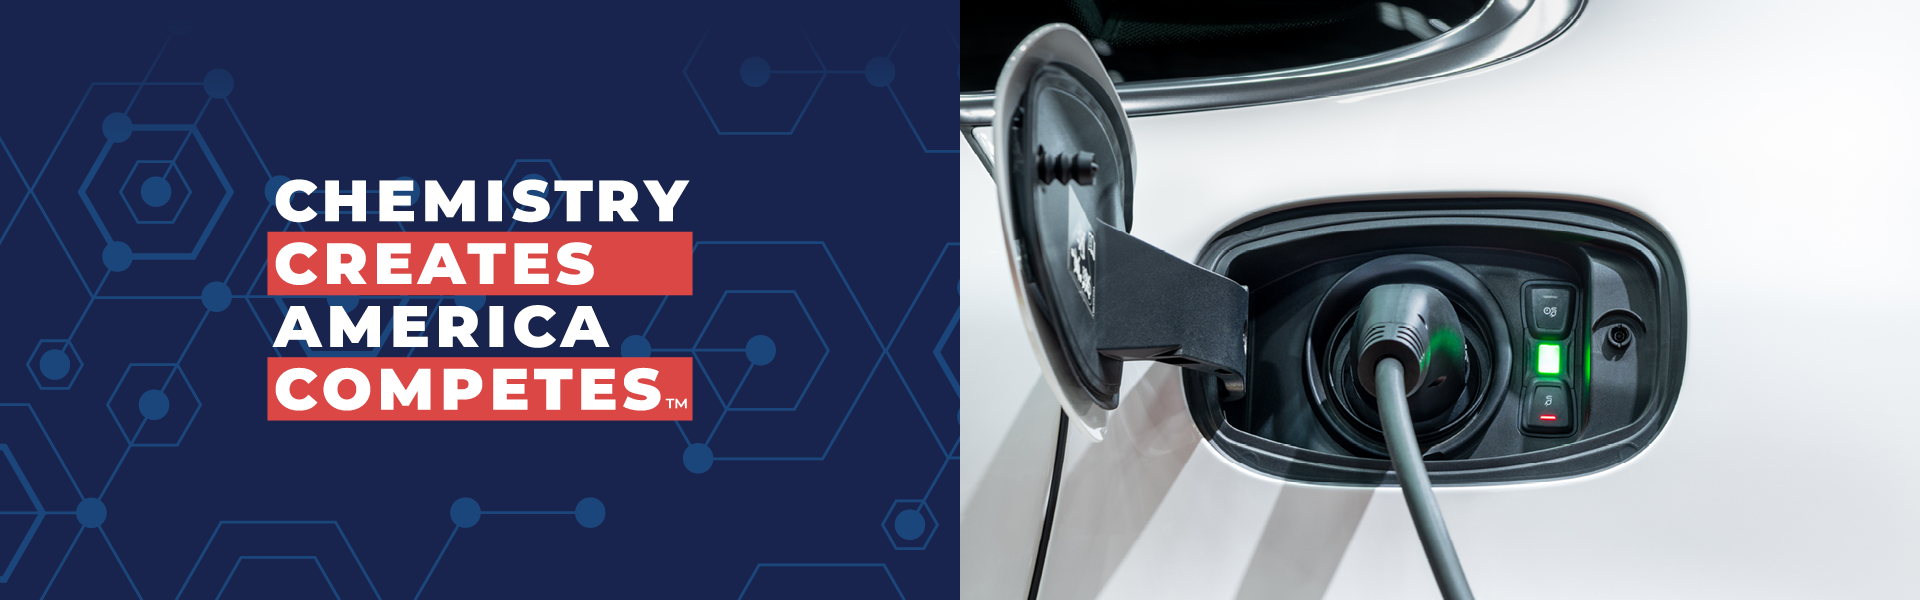 Chemistry Creates America Competes Electric Vehicle Charging